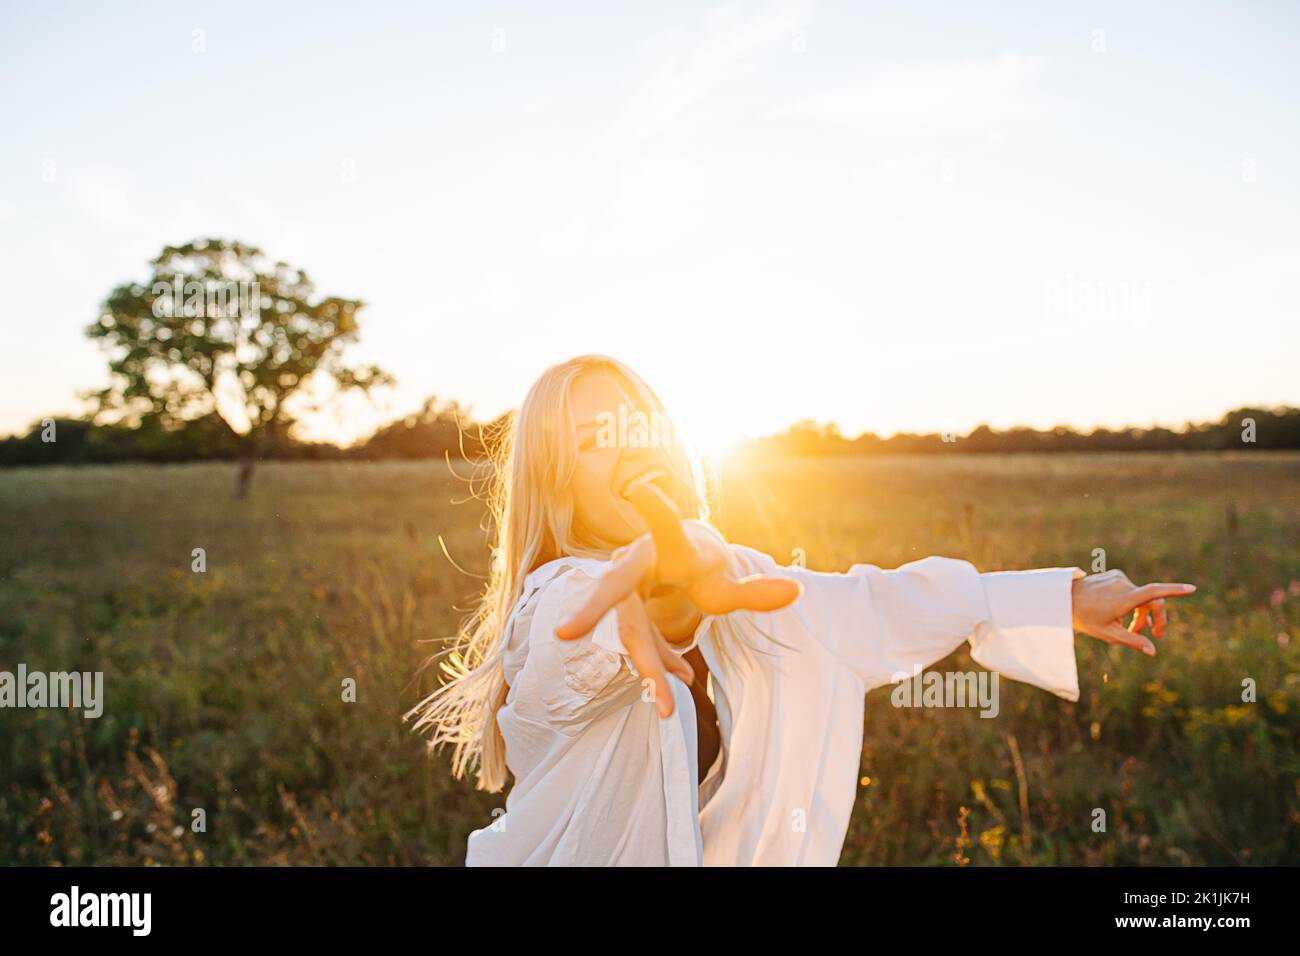 Excited young blond woman standing amidst wheat field. Reaching with her hand. Against setting sun, lit with soft bright orange light. Low angle. Stock Photo